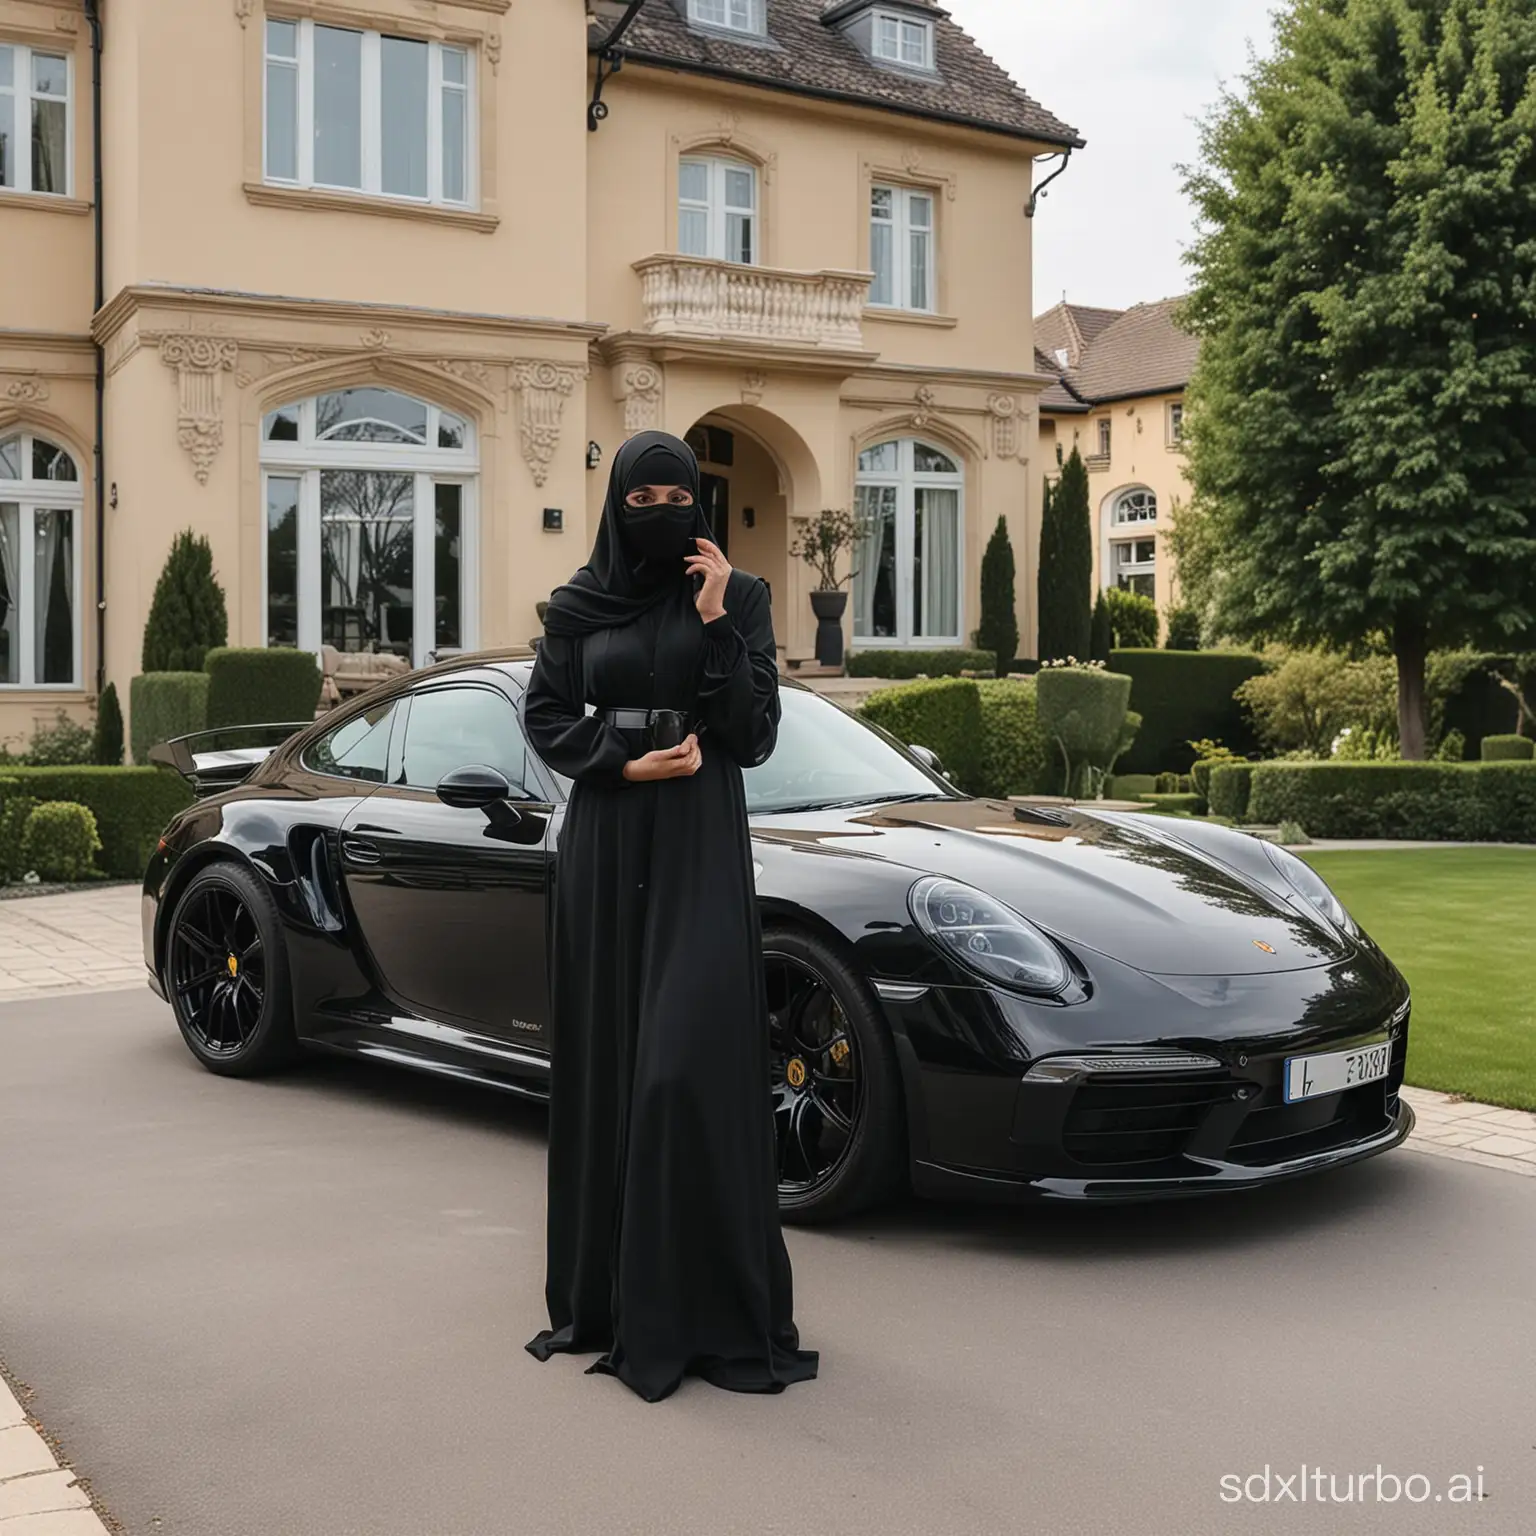 Woman-in-Full-Black-Abaya-and-Niqab-Standing-by-Luxury-House-with-Black-Porsche